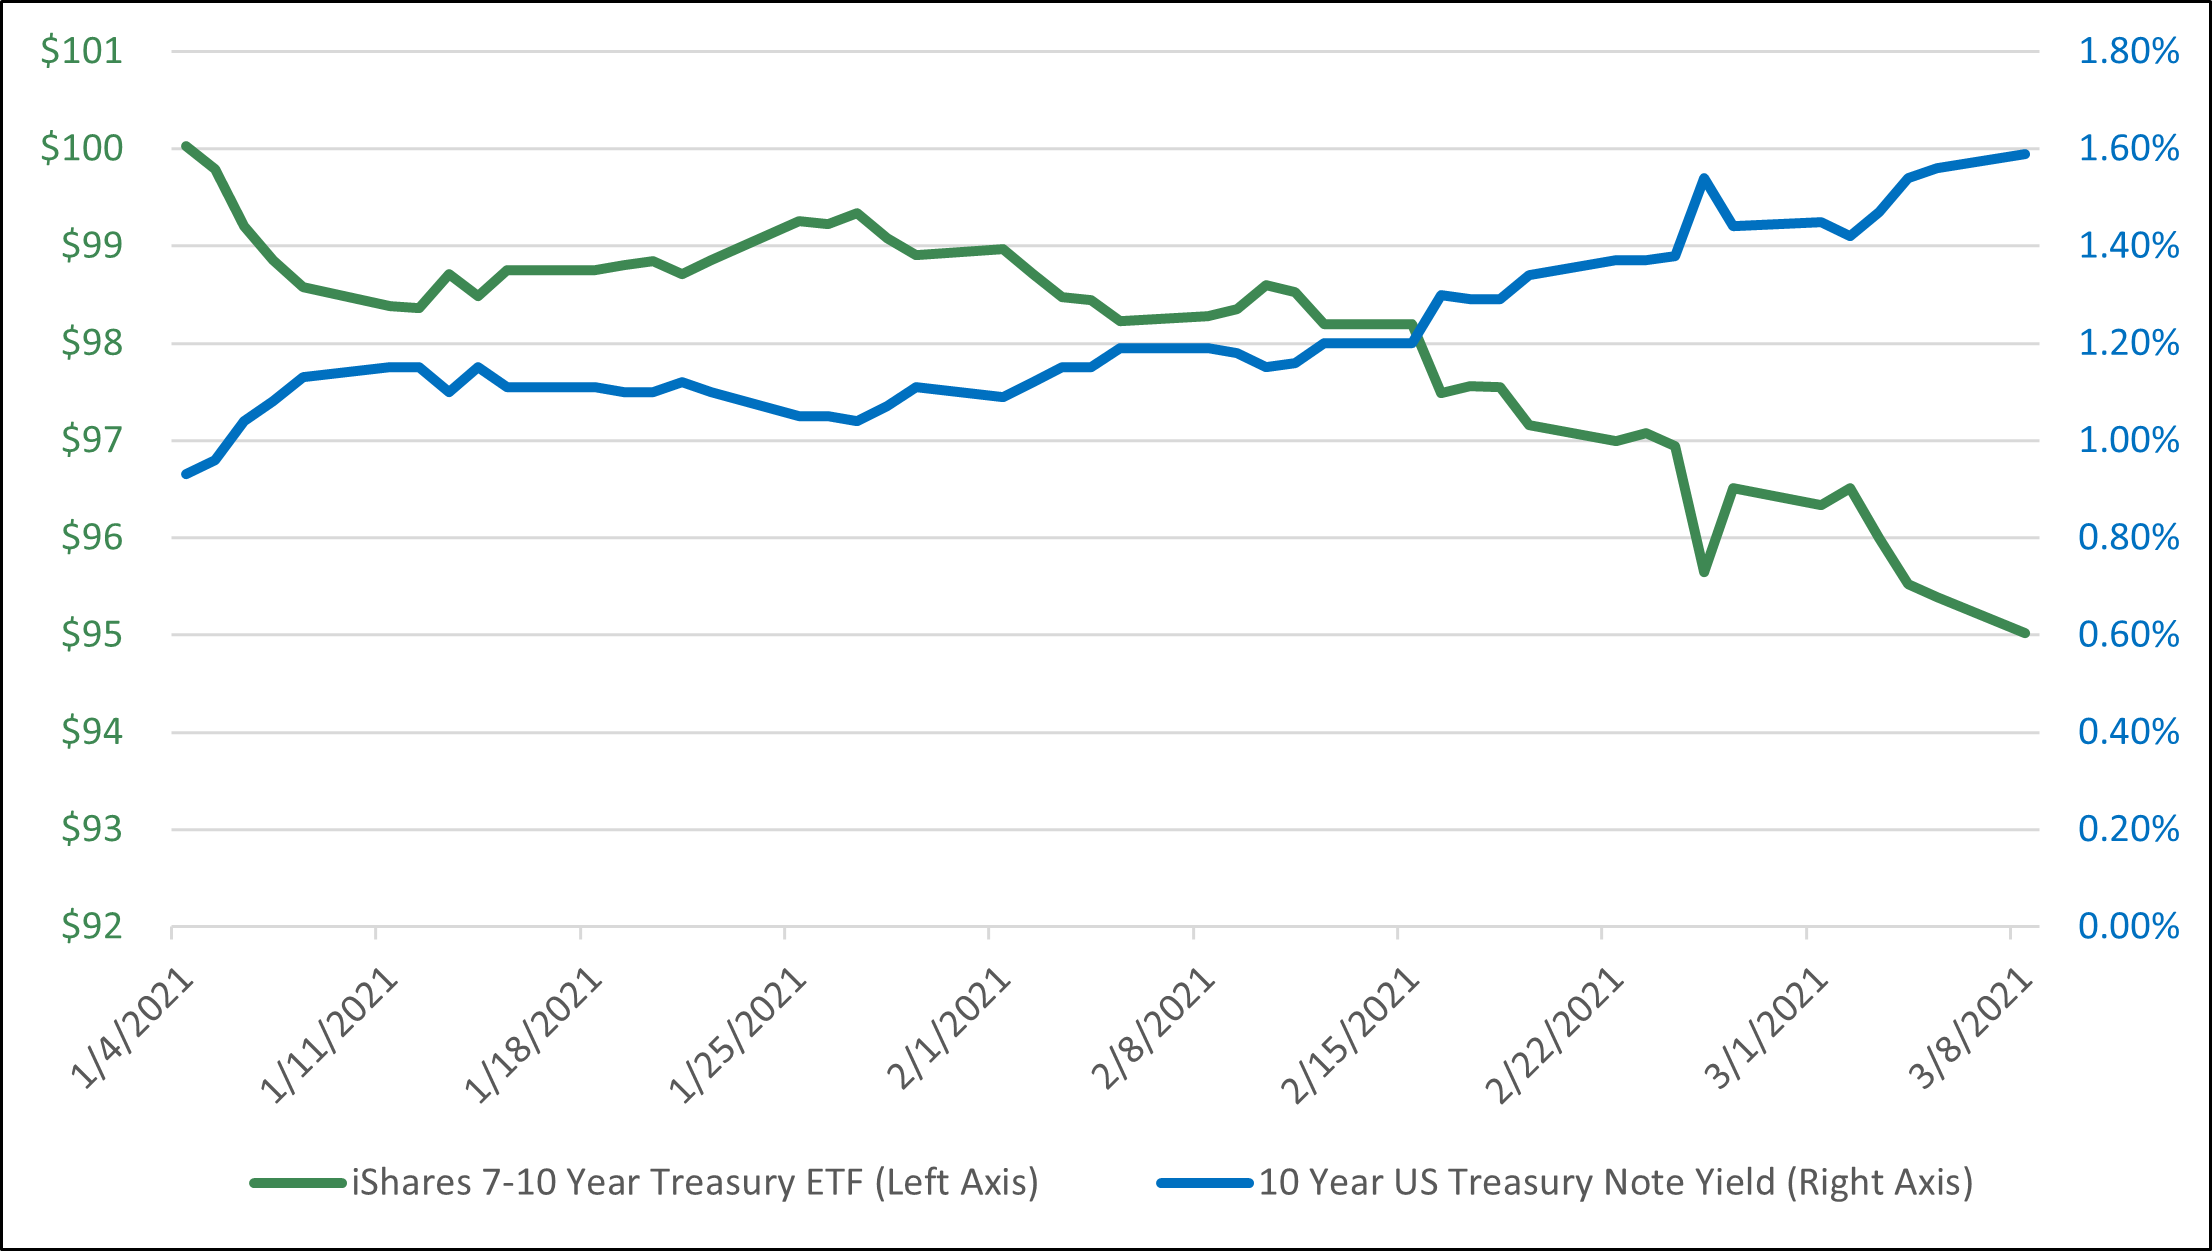 Line graph depicting rising treasury yields and falling prices of both iShares 7-10 Year Treasury ETF and 10 Year US Treasury Note Yield from January 4, 2021 to March 8, 2021